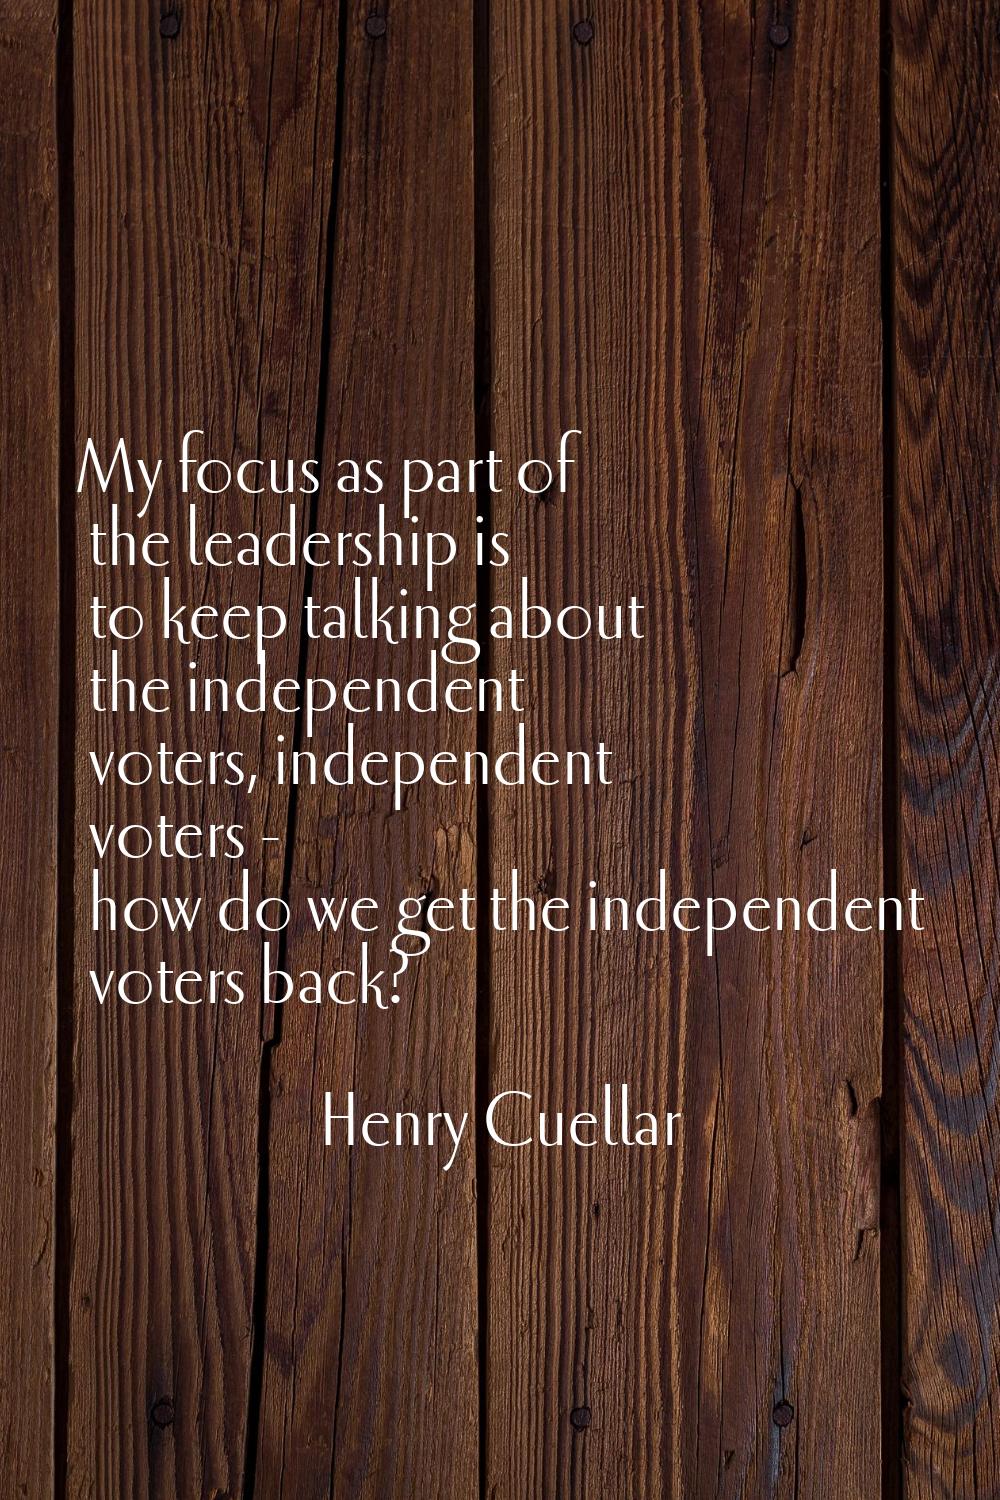 My focus as part of the leadership is to keep talking about the independent voters, independent vot